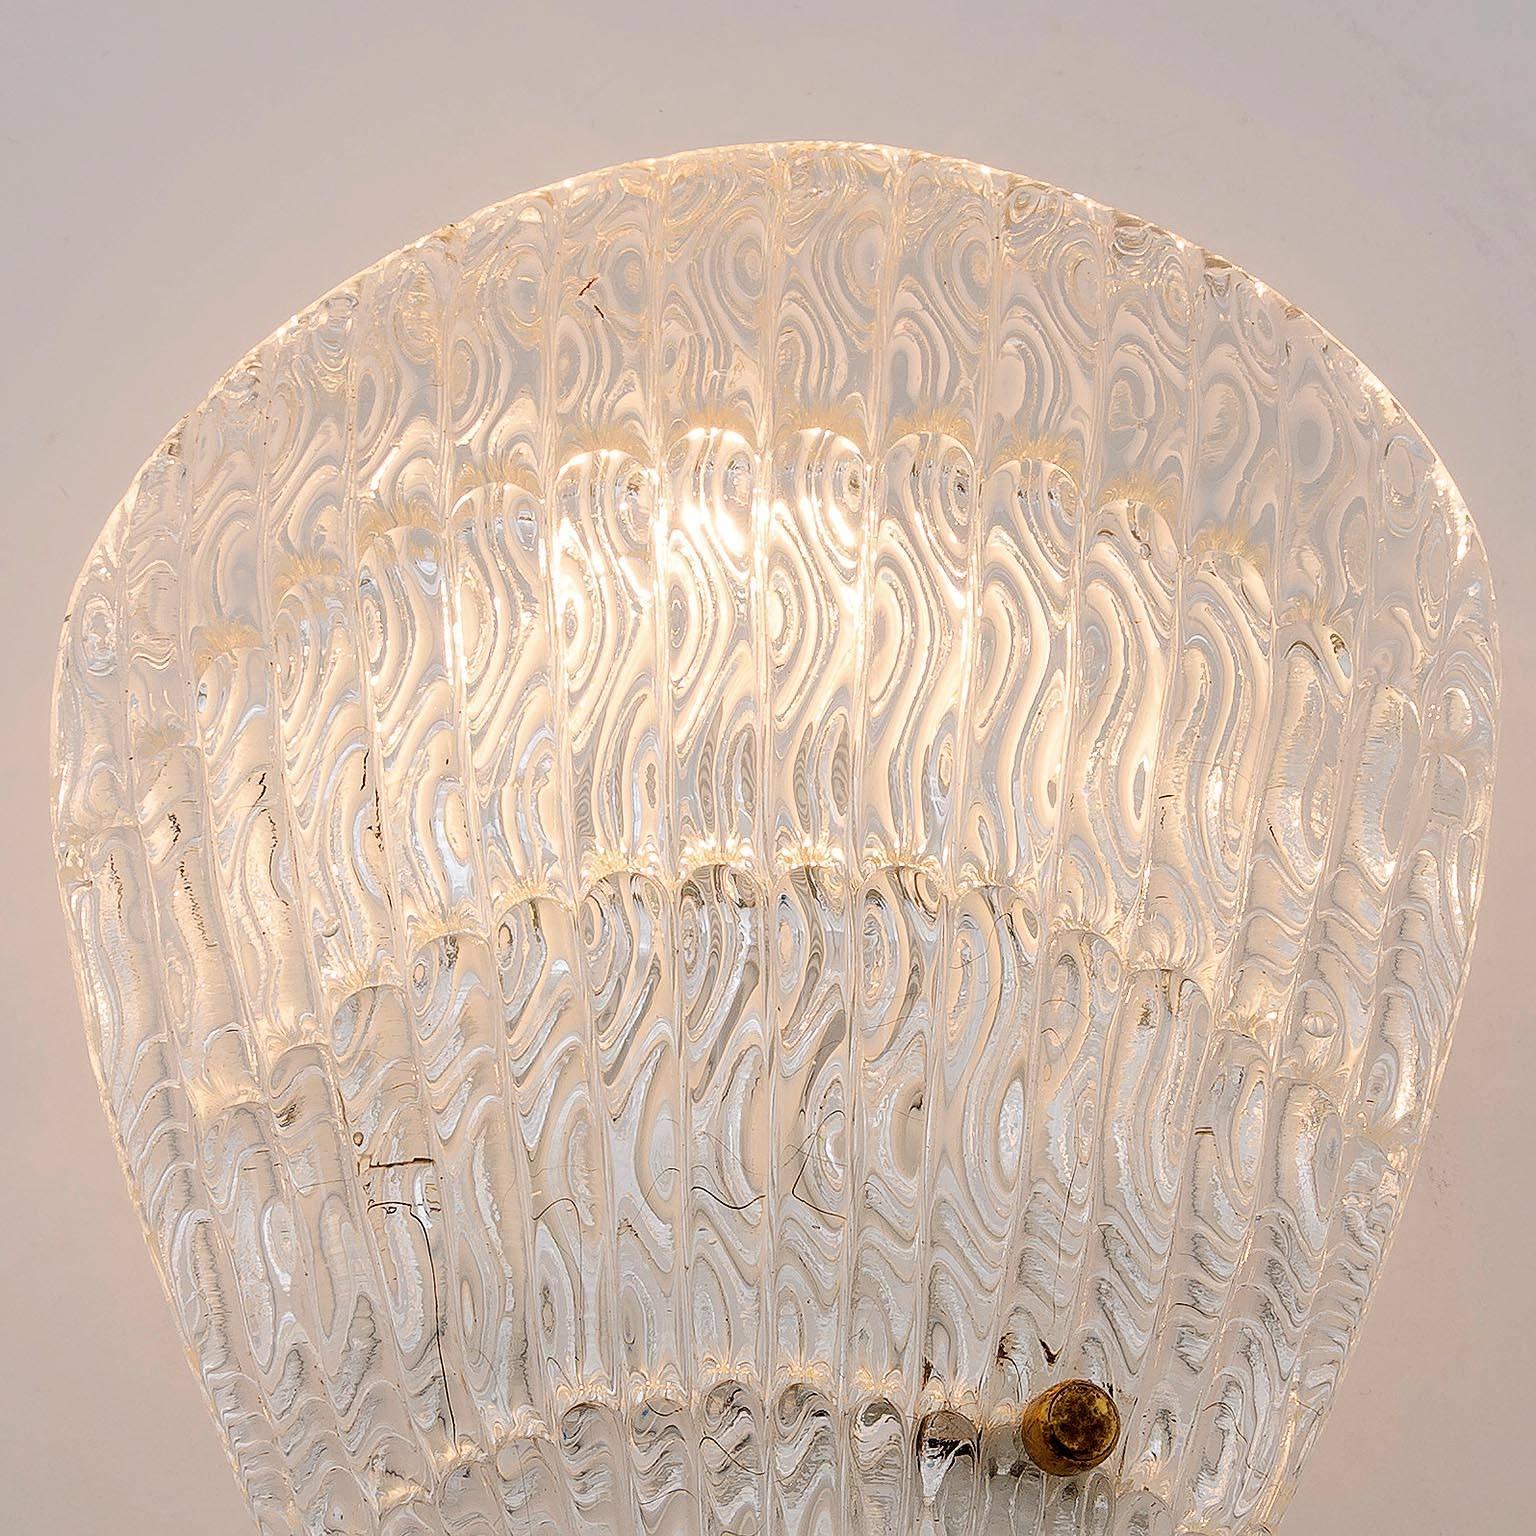 1 of 3 Shell Textured Glass Sconces Wall Lights by Rupert Nikoll, Vienna, 1950s For Sale 2